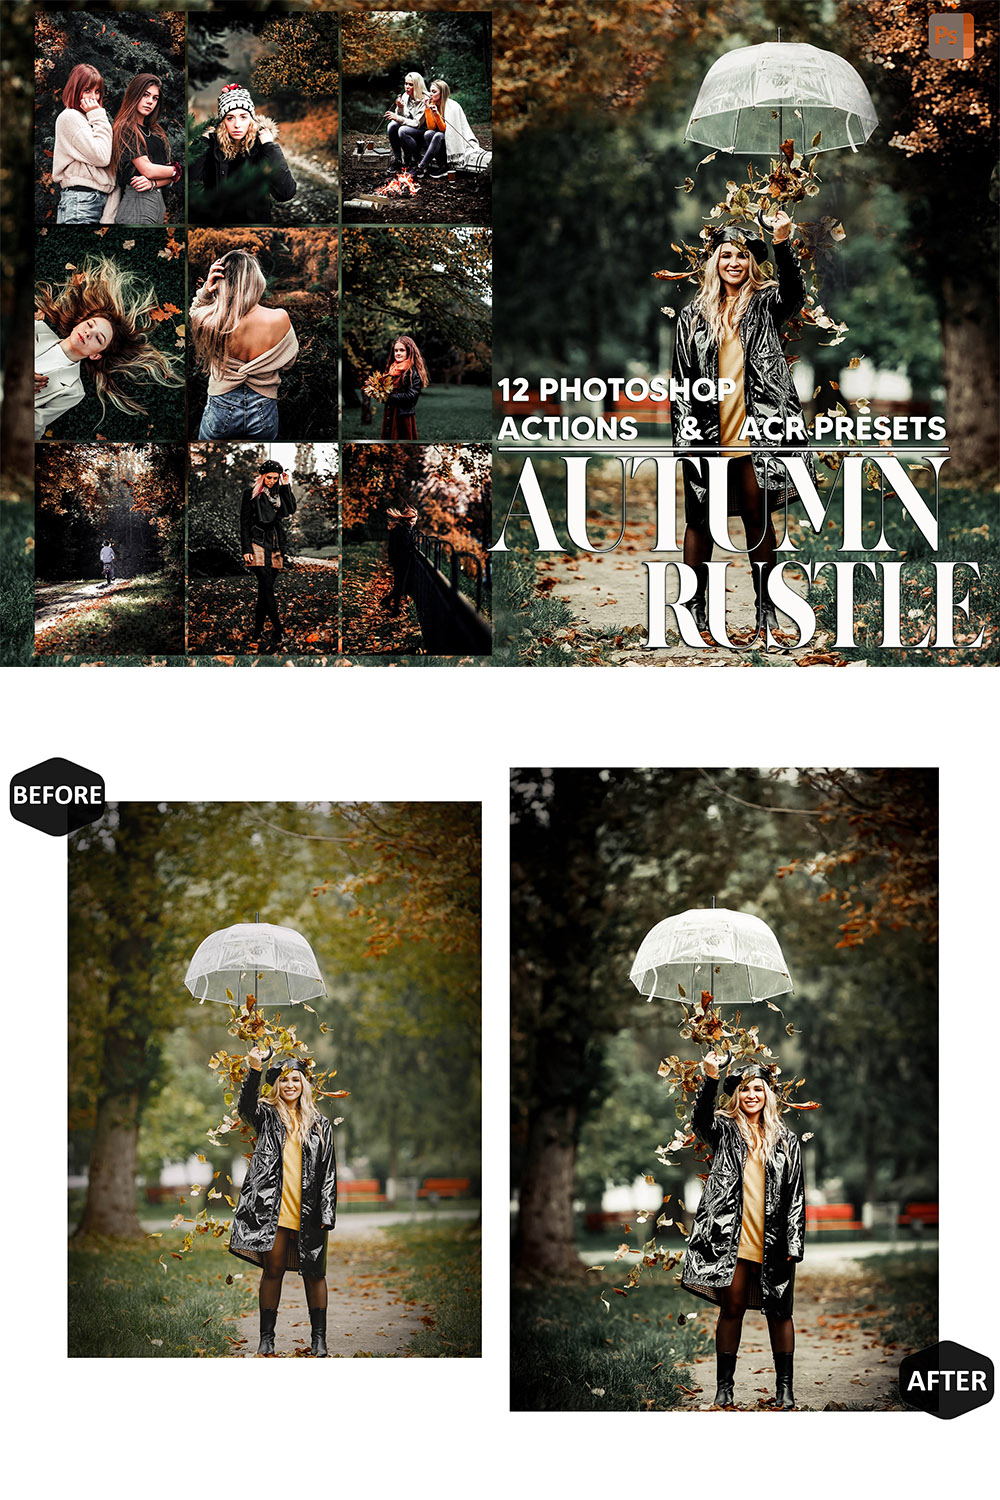 12 Photoshop Actions, Autumn Rustle Ps Action, Leaves ACR Editing, Moody Ps Filter, Atn Portrait And style Theme For Instagram, Blogger pinterest preview image.